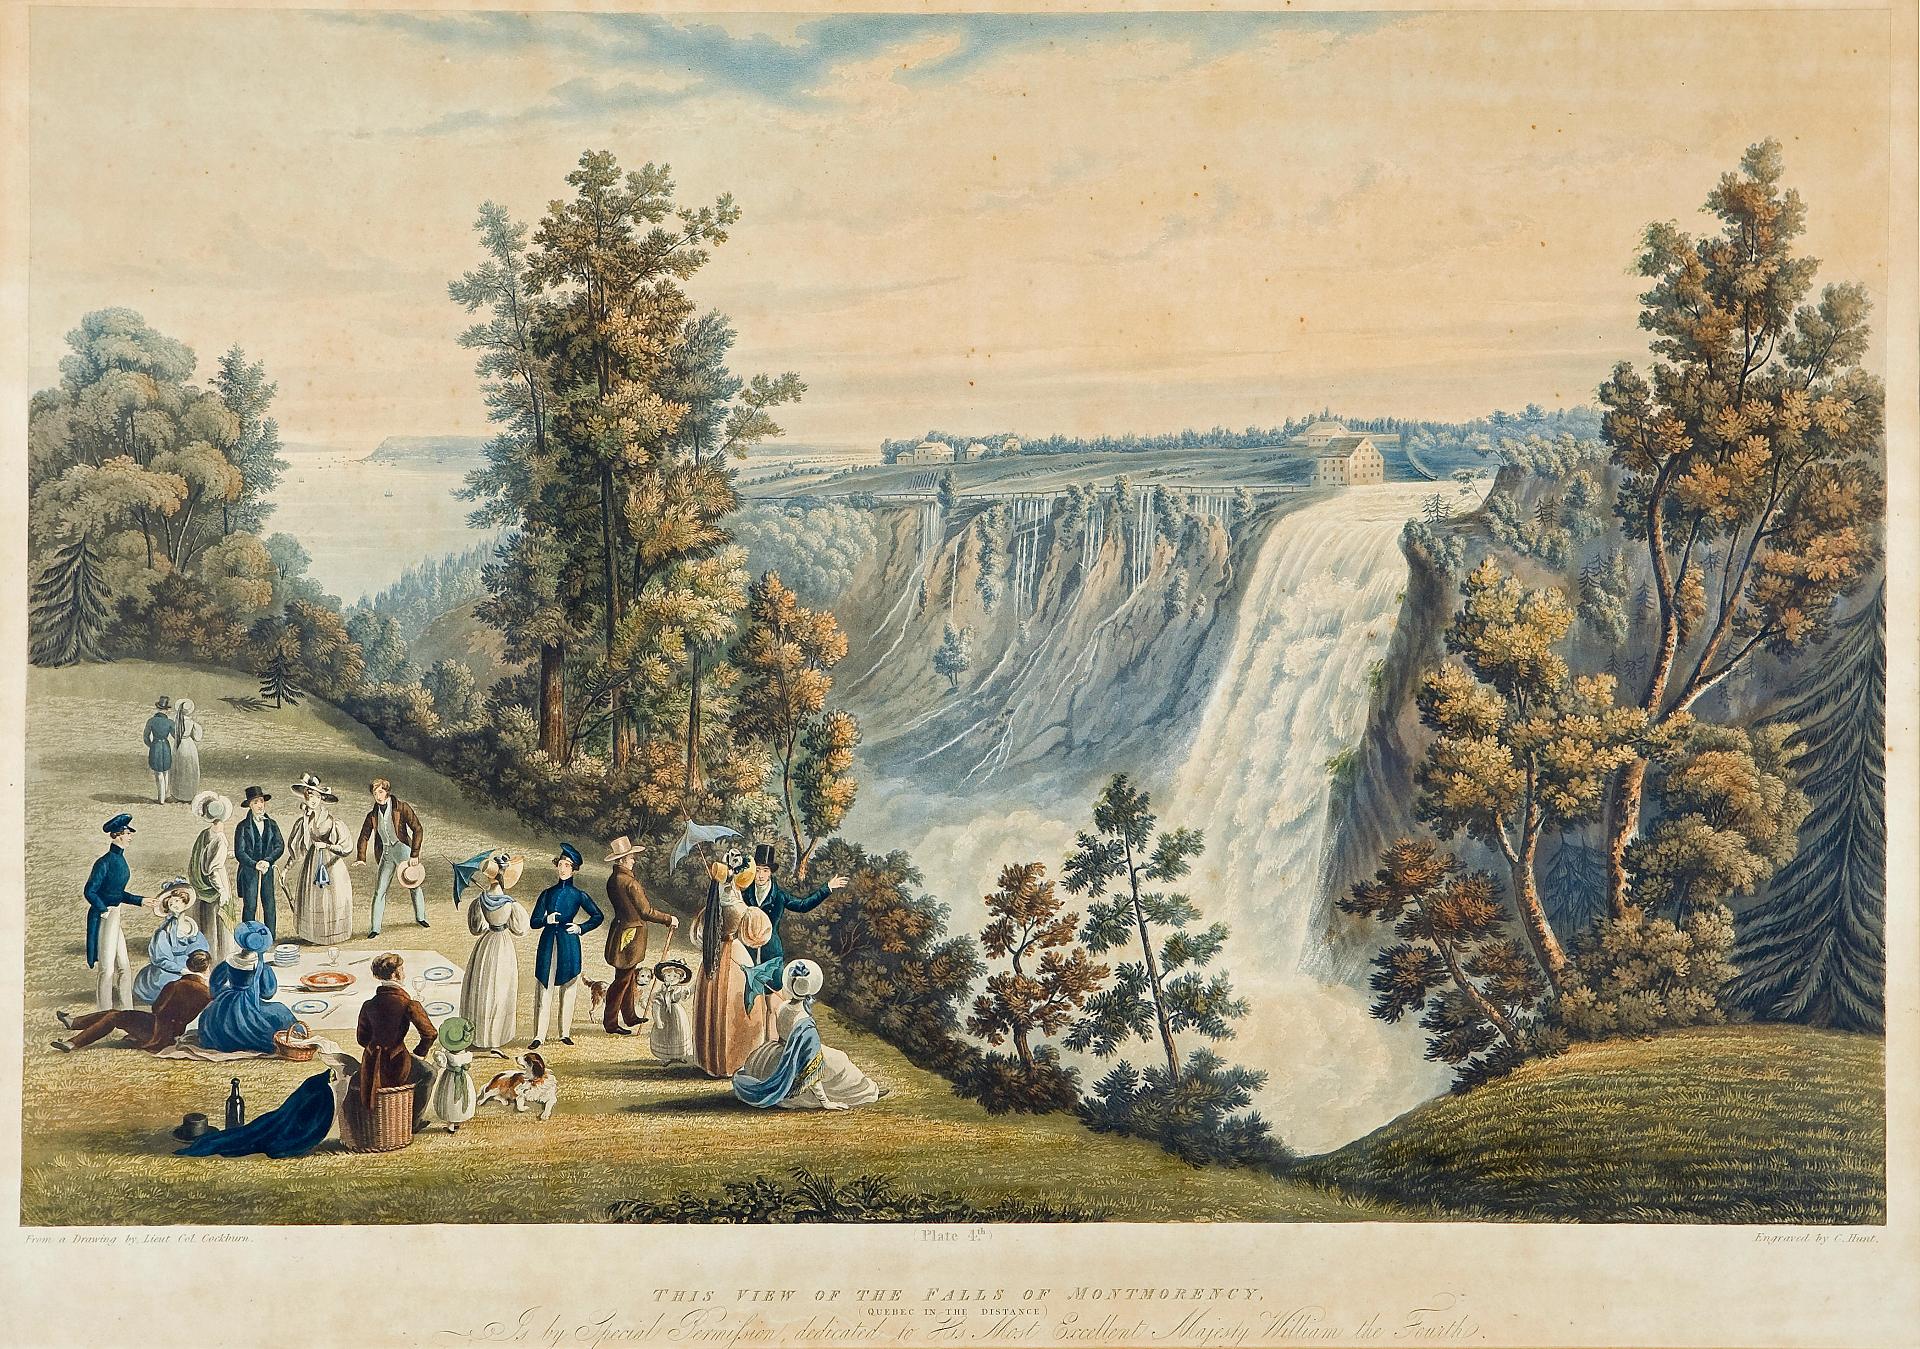 James Pattison Cockburn (1778-1847) - The Falls of Montmerancy (Québec in the distance) plate 4 by C.Hunt, published by Ackermann & Co., London 1833